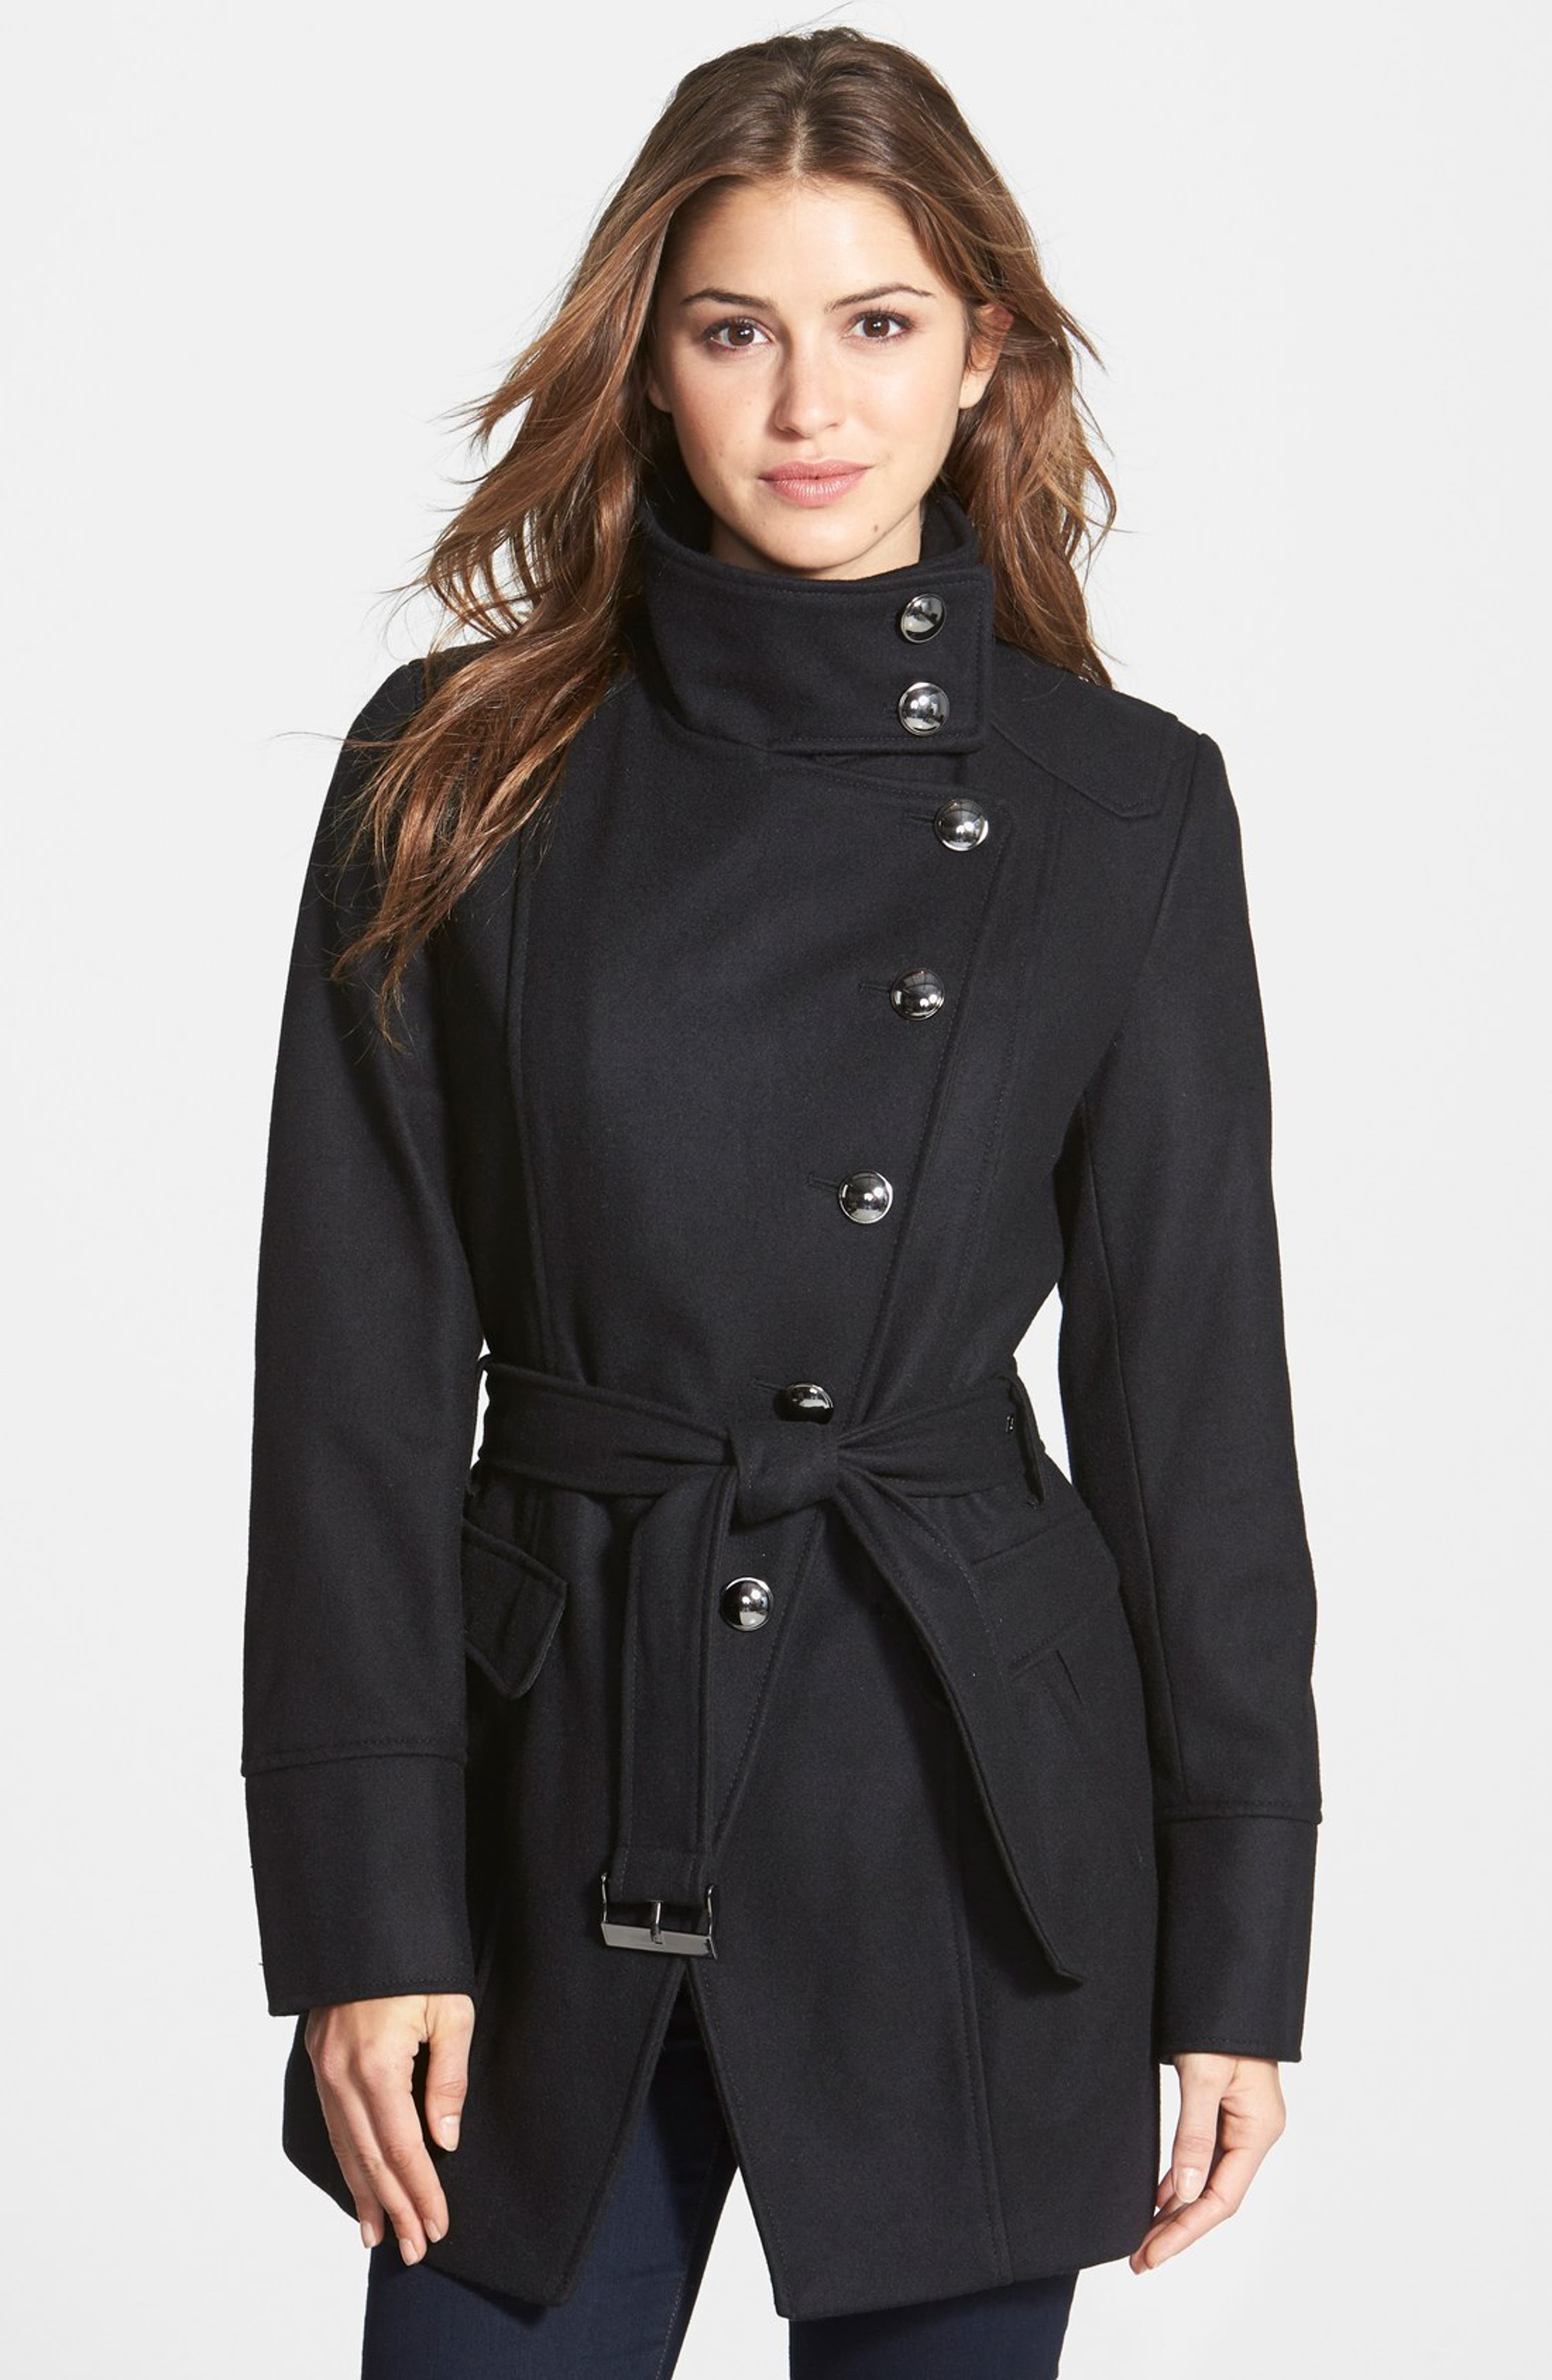 Kenneth Cole New York Belted Wool Blend Asymmetrical Military Coat ...